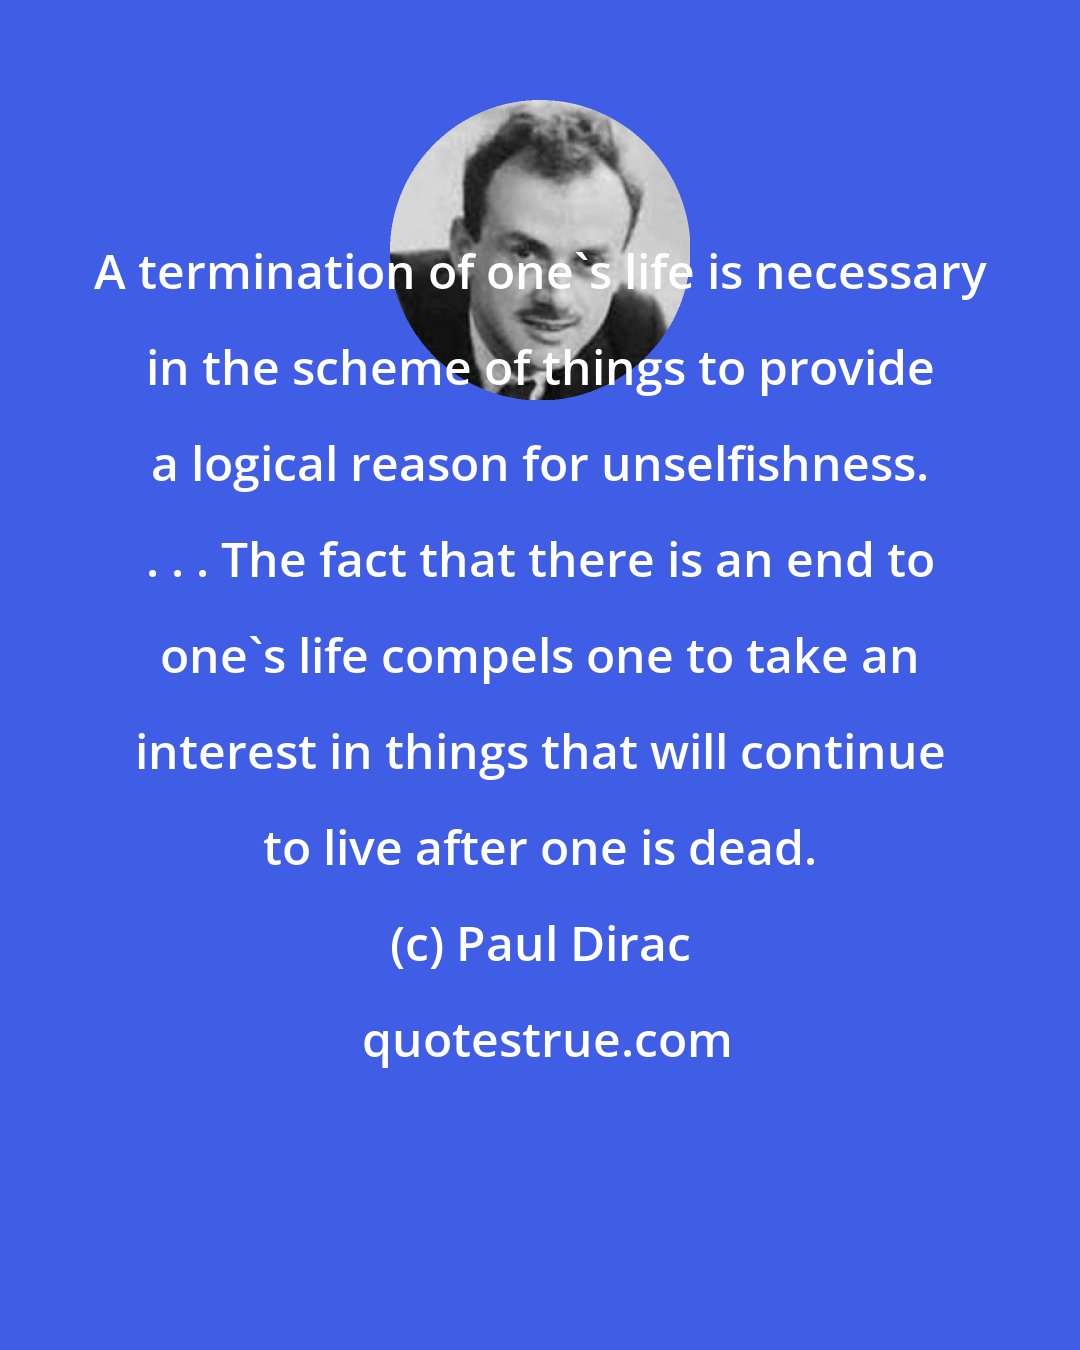 Paul Dirac: A termination of one's life is necessary in the scheme of things to provide a logical reason for unselfishness. . . . The fact that there is an end to one's life compels one to take an interest in things that will continue to live after one is dead.